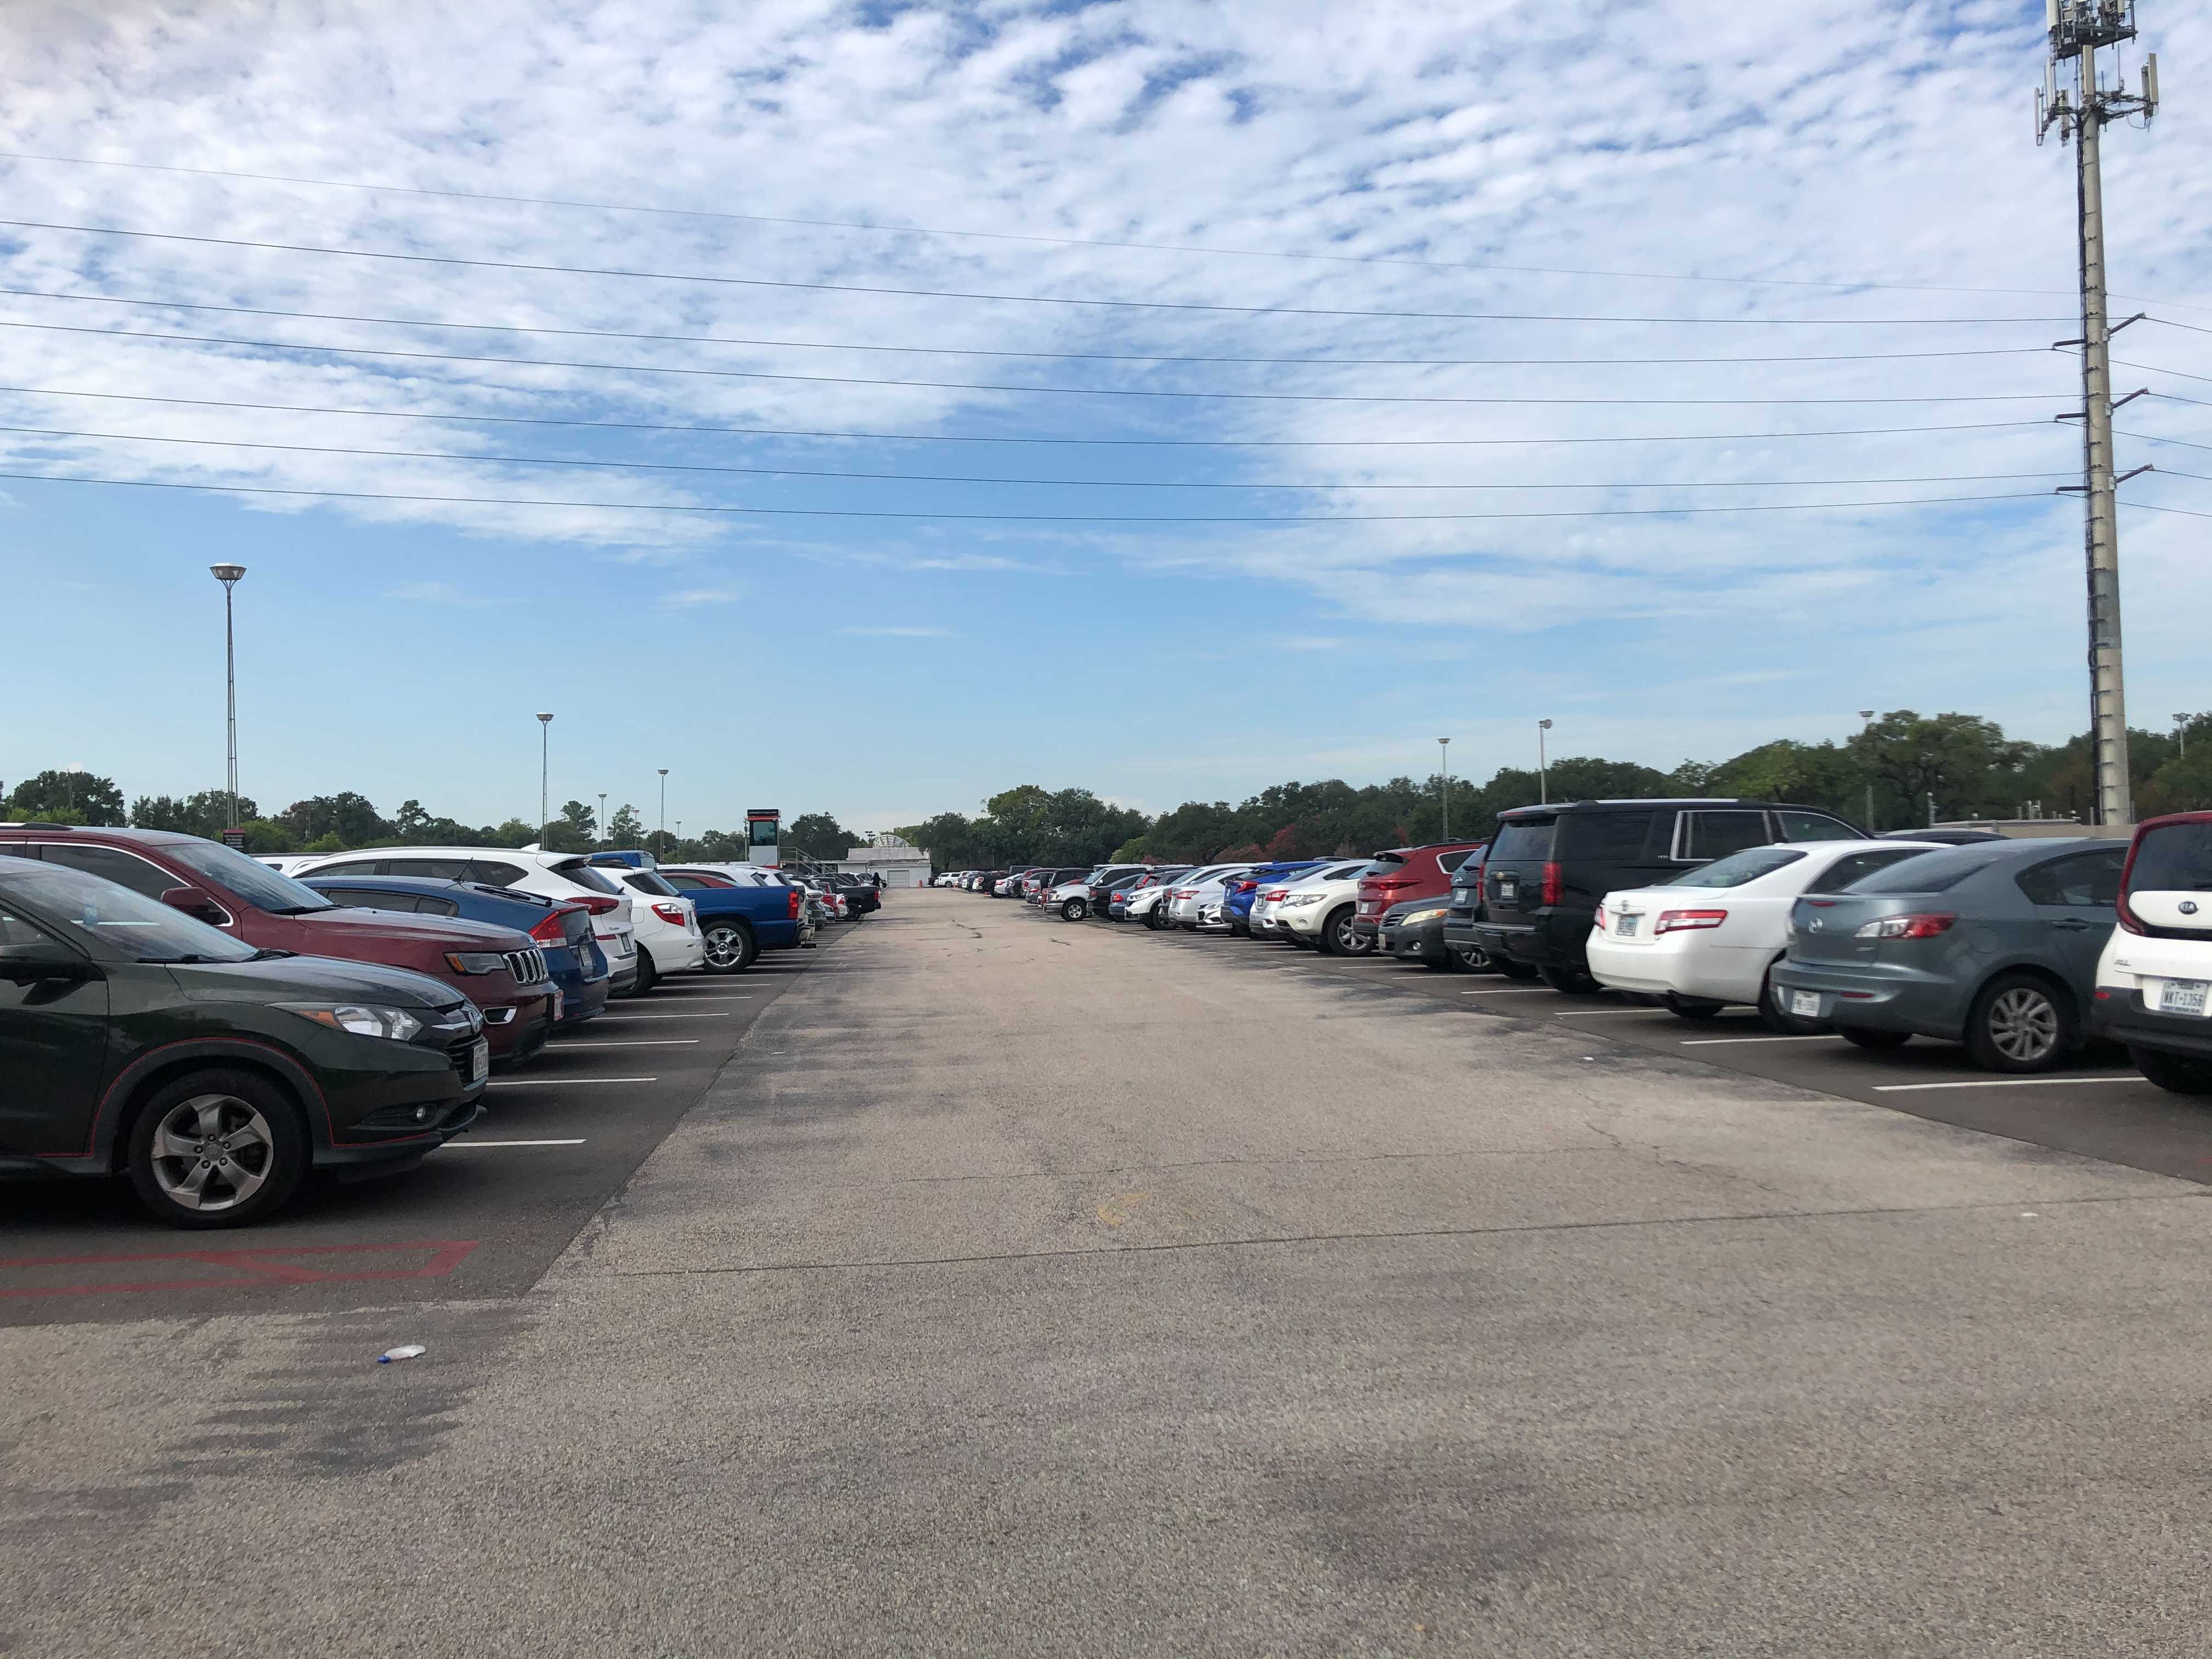 Zone E, on the edge of campus near Cullen Oaks, Cambridge Oaks and The Quad, is regularly congested on class days. | Malachi Key/The Cougar